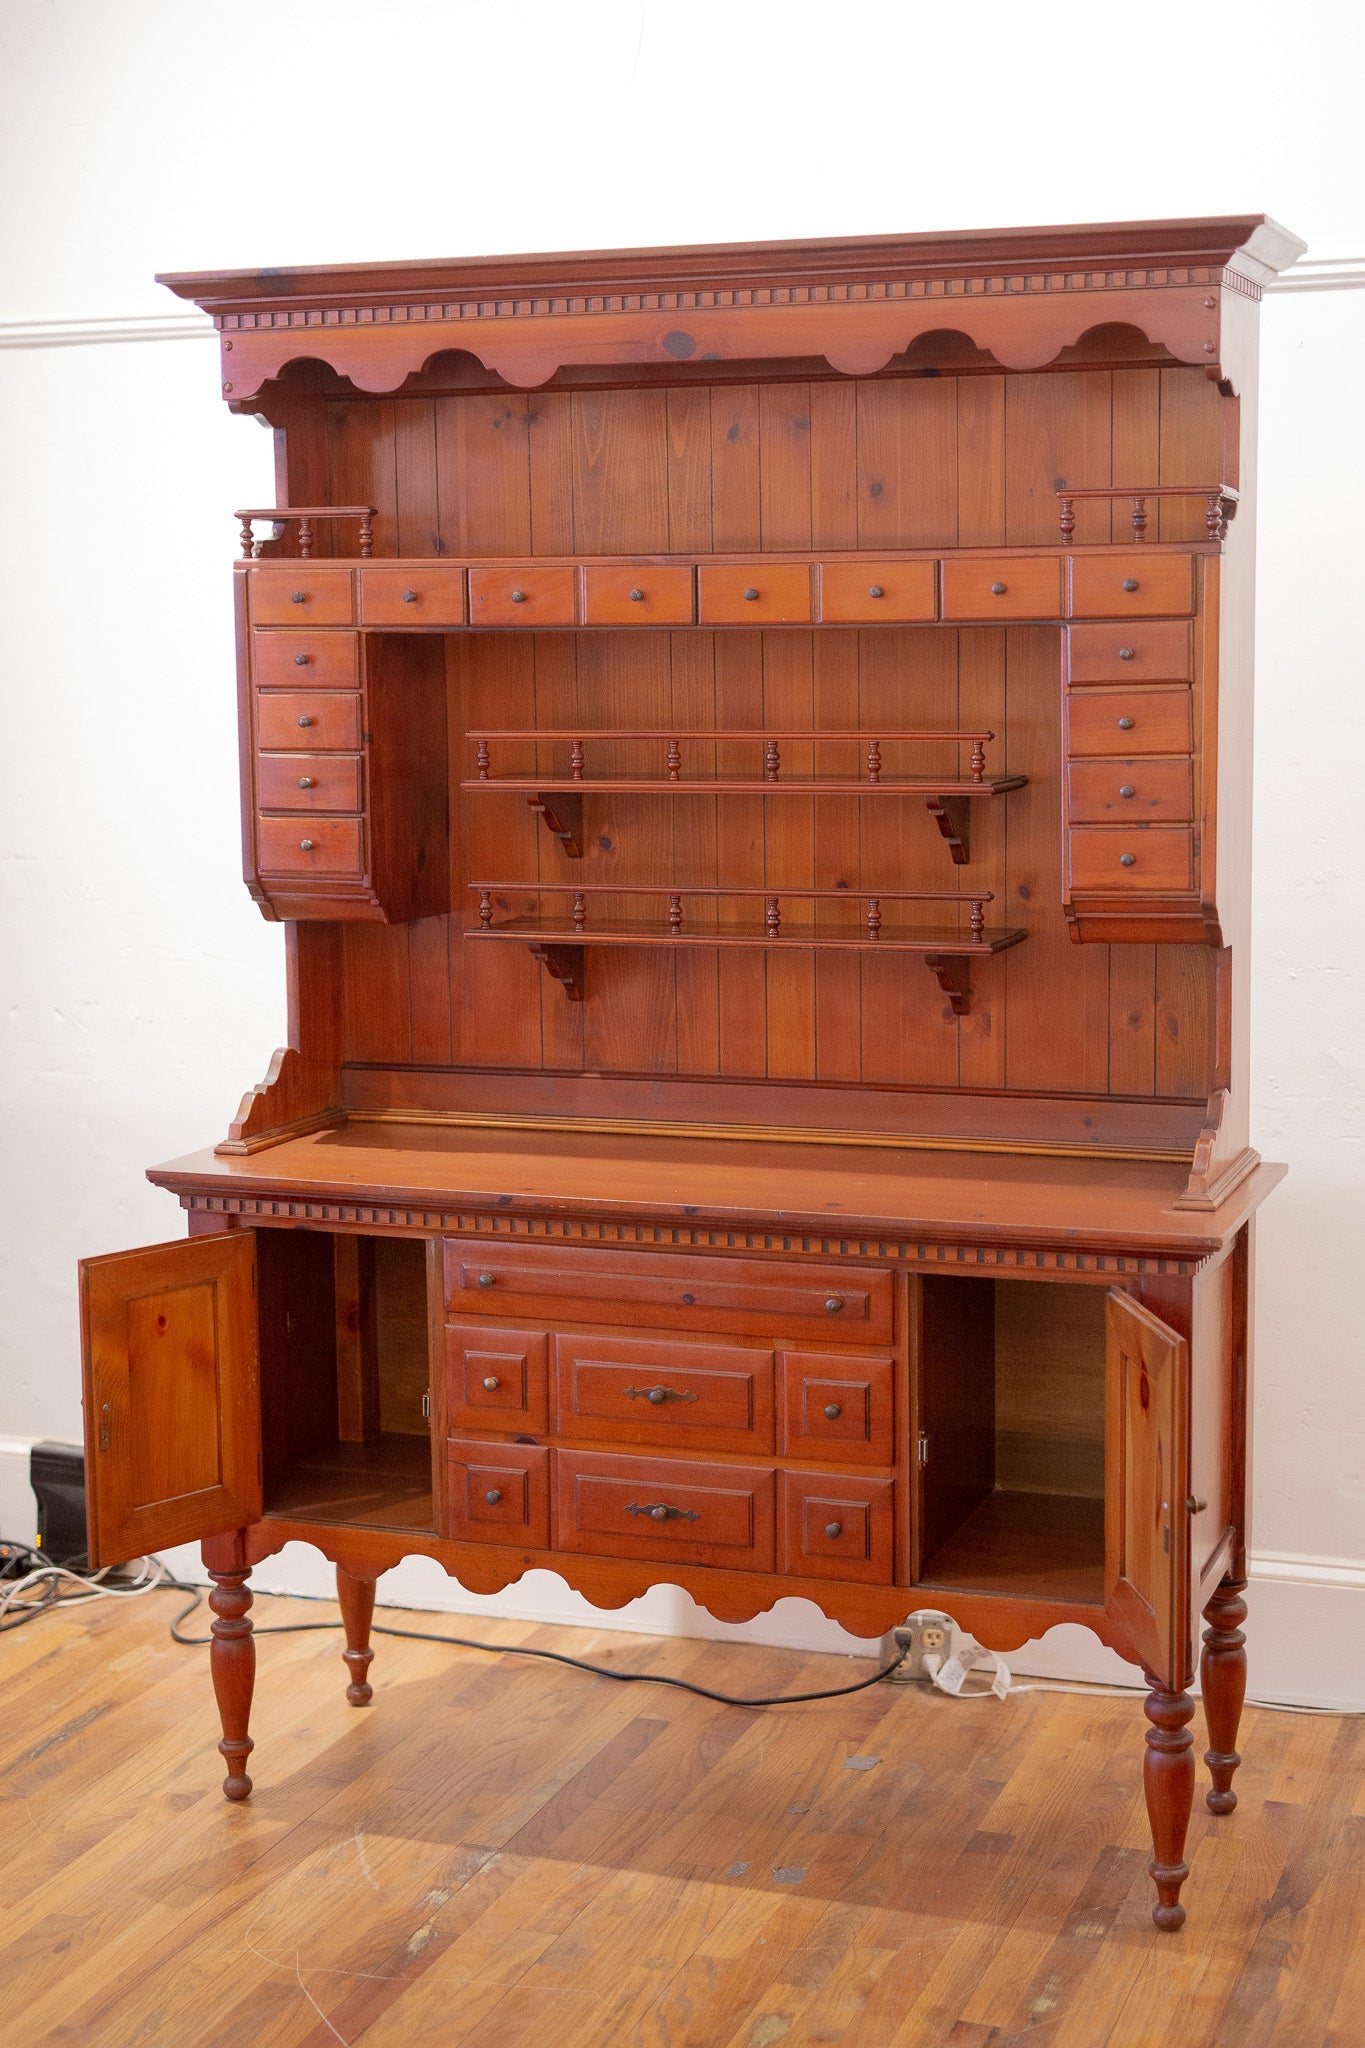 French Country Style Hutch with Drawers